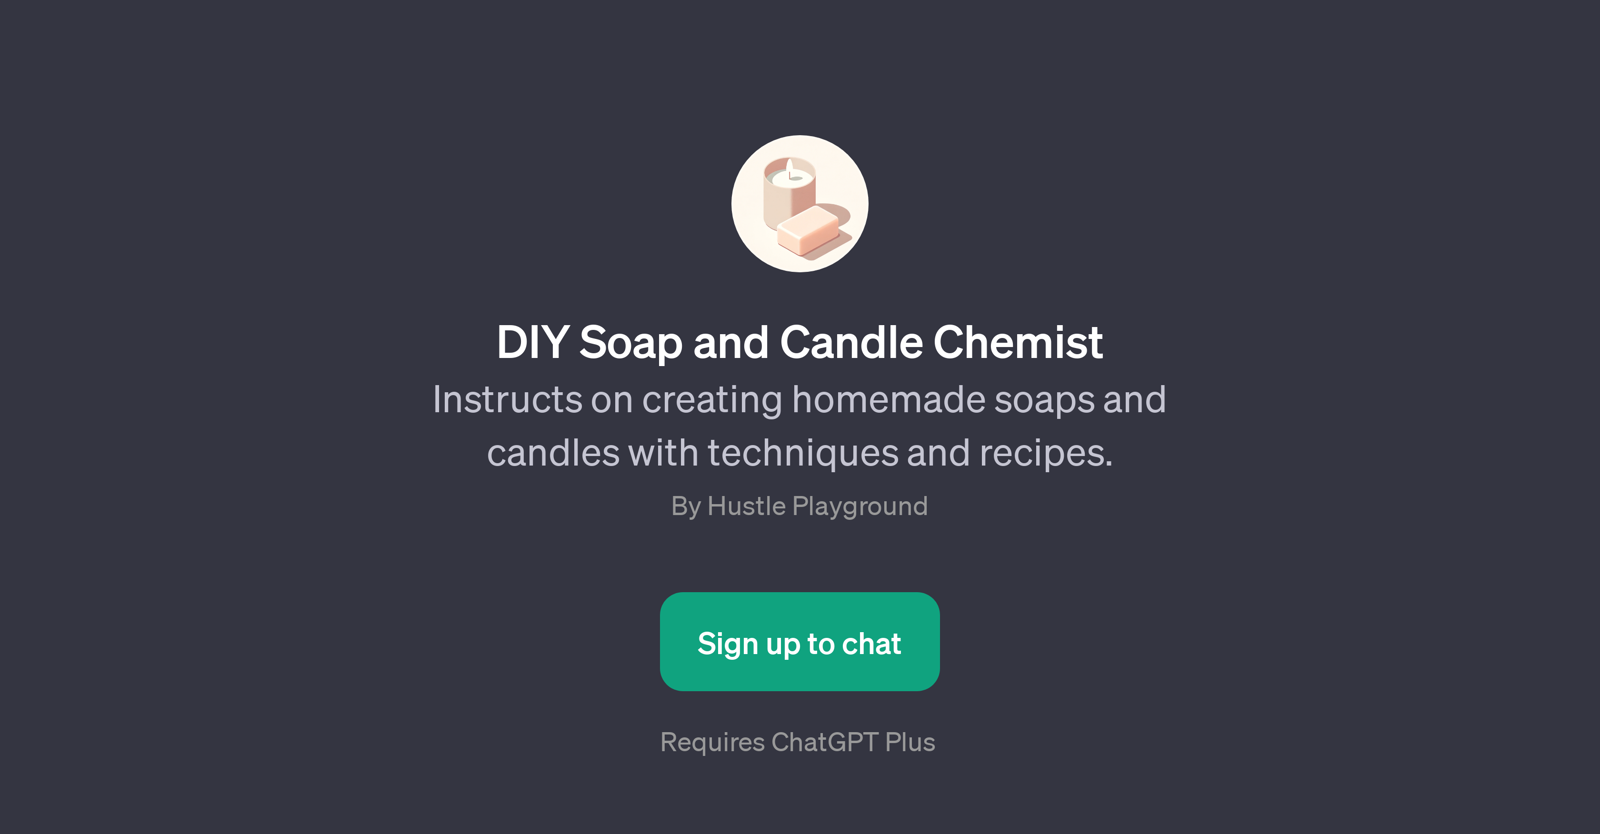 DIY Soap and Candle Chemist website